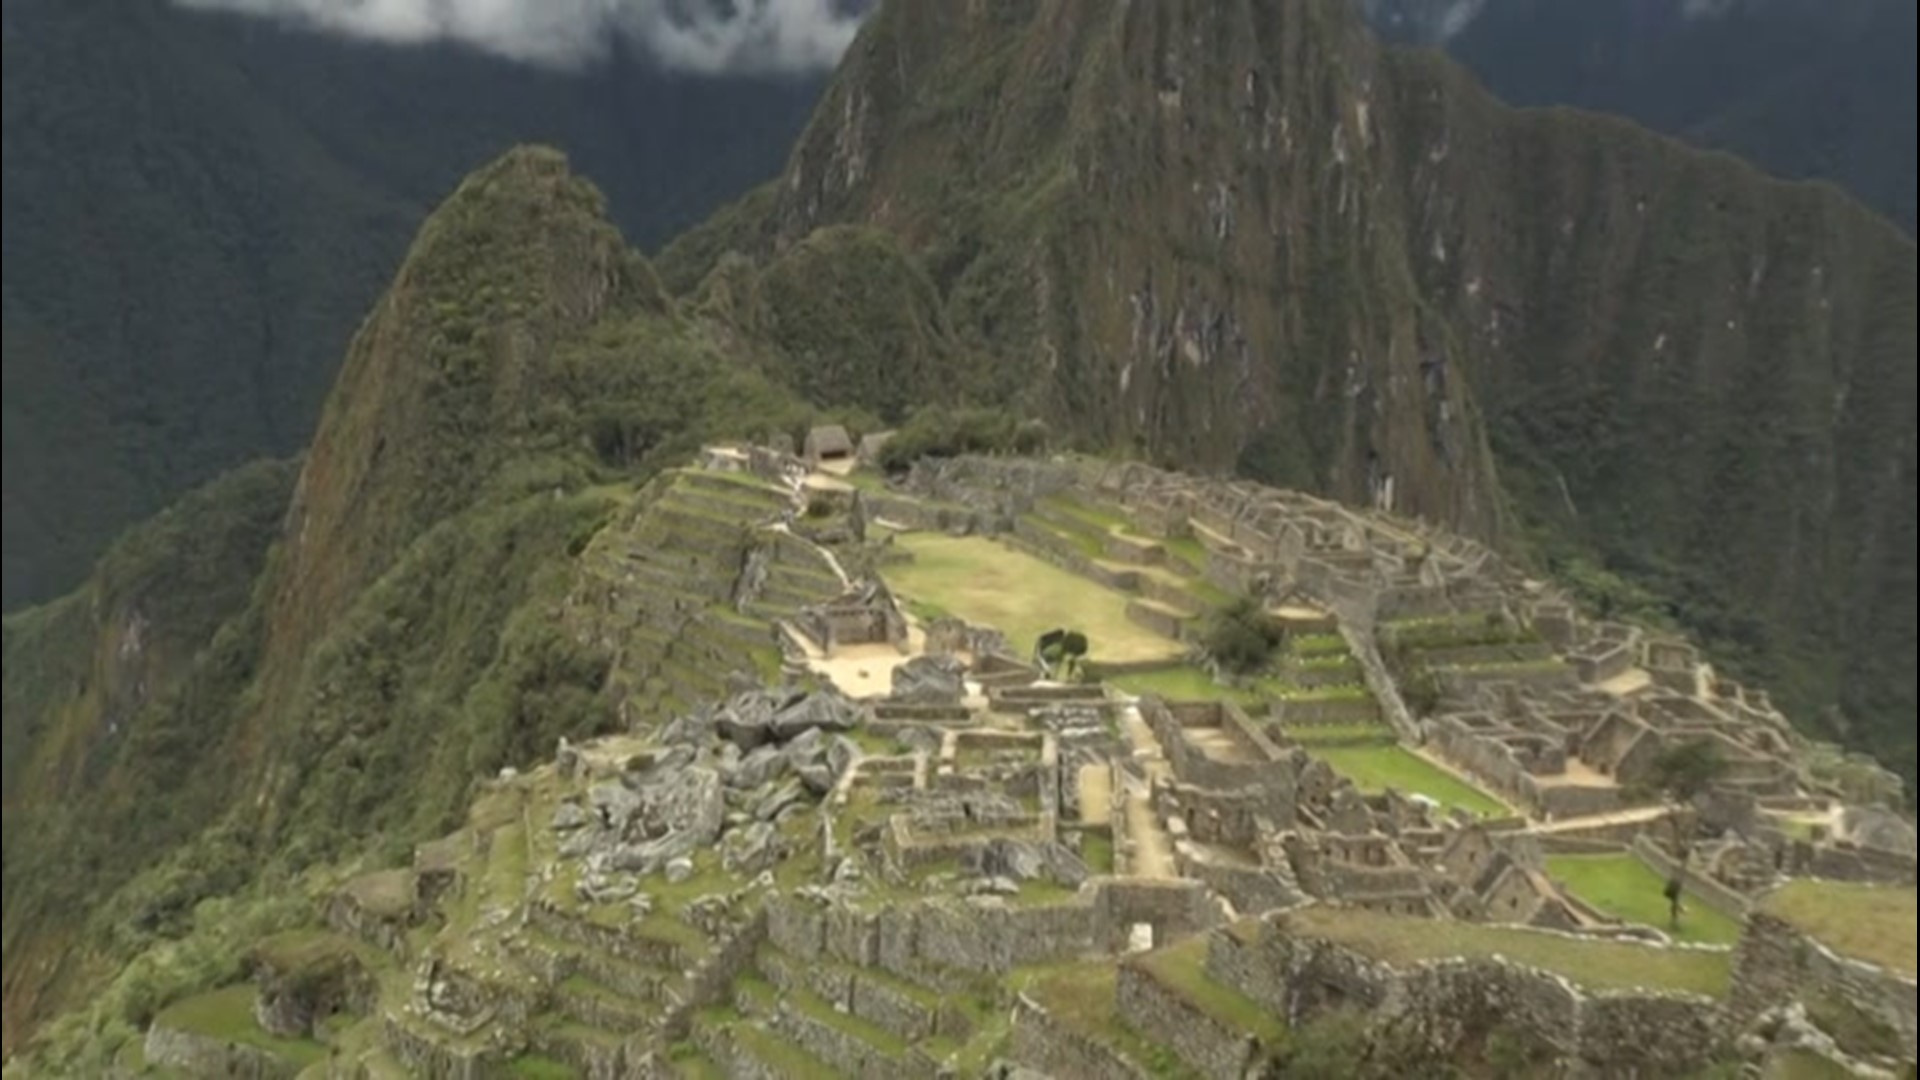 Peru's Machu Picchu welcomed guests once again on Nov. 1, after the Inca Citadel and popular tourist site closed to visitors earlier this year due to COVID-19.